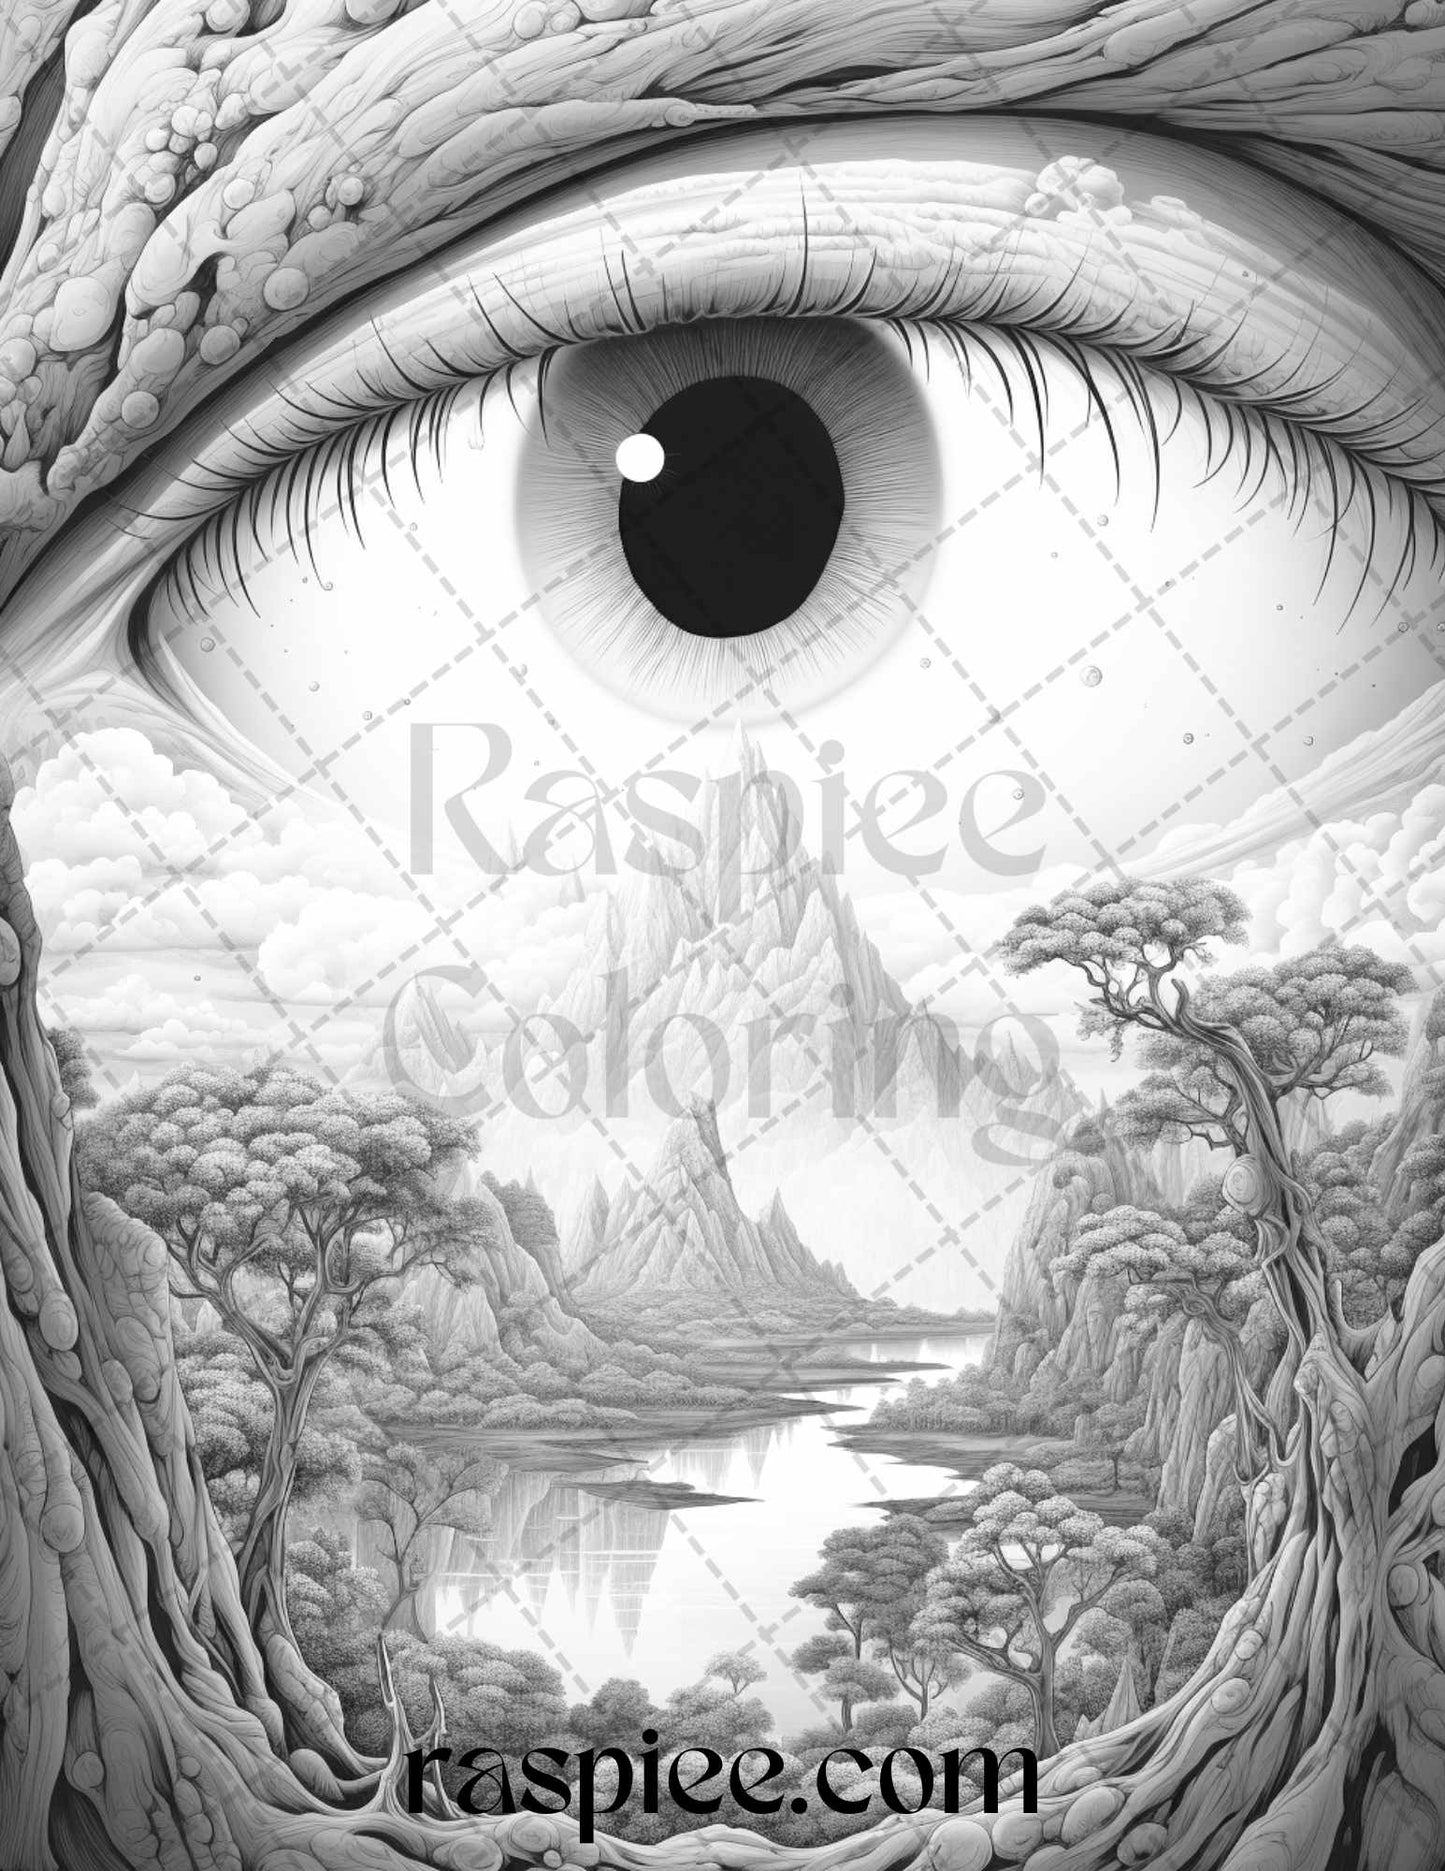 Surrealism Eyes Grayscale Coloring Page, Adult Coloring Printable, DIY Coloring Book Page, Mindful Coloring Activity, Relaxation Coloring Sheet, Unique Coloring Illustration, High-Quality Coloring Page, Printable Coloring for Adults, Surrealism Coloring Pages